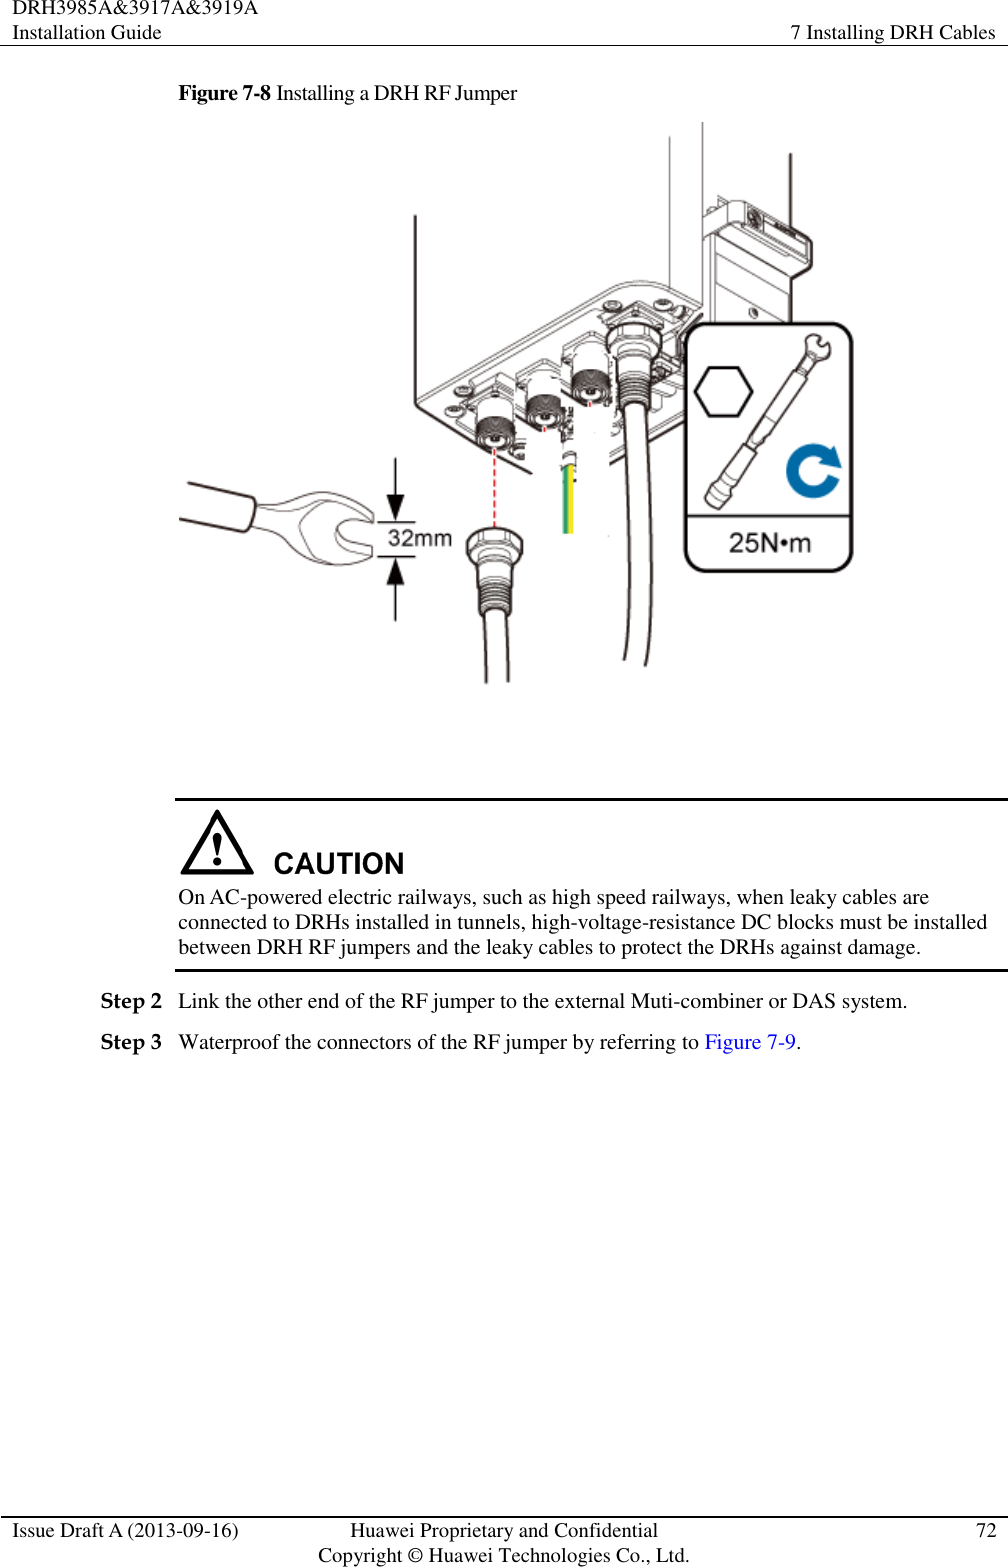 DRH3985A&amp;3917A&amp;3919A Installation Guide 7 Installing DRH Cables  Issue Draft A (2013-09-16) Huawei Proprietary and Confidential                                     Copyright © Huawei Technologies Co., Ltd. 72  Figure 7-8 Installing a DRH RF Jumper     On AC-powered electric railways, such as high speed railways, when leaky cables are connected to DRHs installed in tunnels, high-voltage-resistance DC blocks must be installed between DRH RF jumpers and the leaky cables to protect the DRHs against damage. Step 2 Link the other end of the RF jumper to the external Muti-combiner or DAS system. Step 3 Waterproof the connectors of the RF jumper by referring to Figure 7-9. 